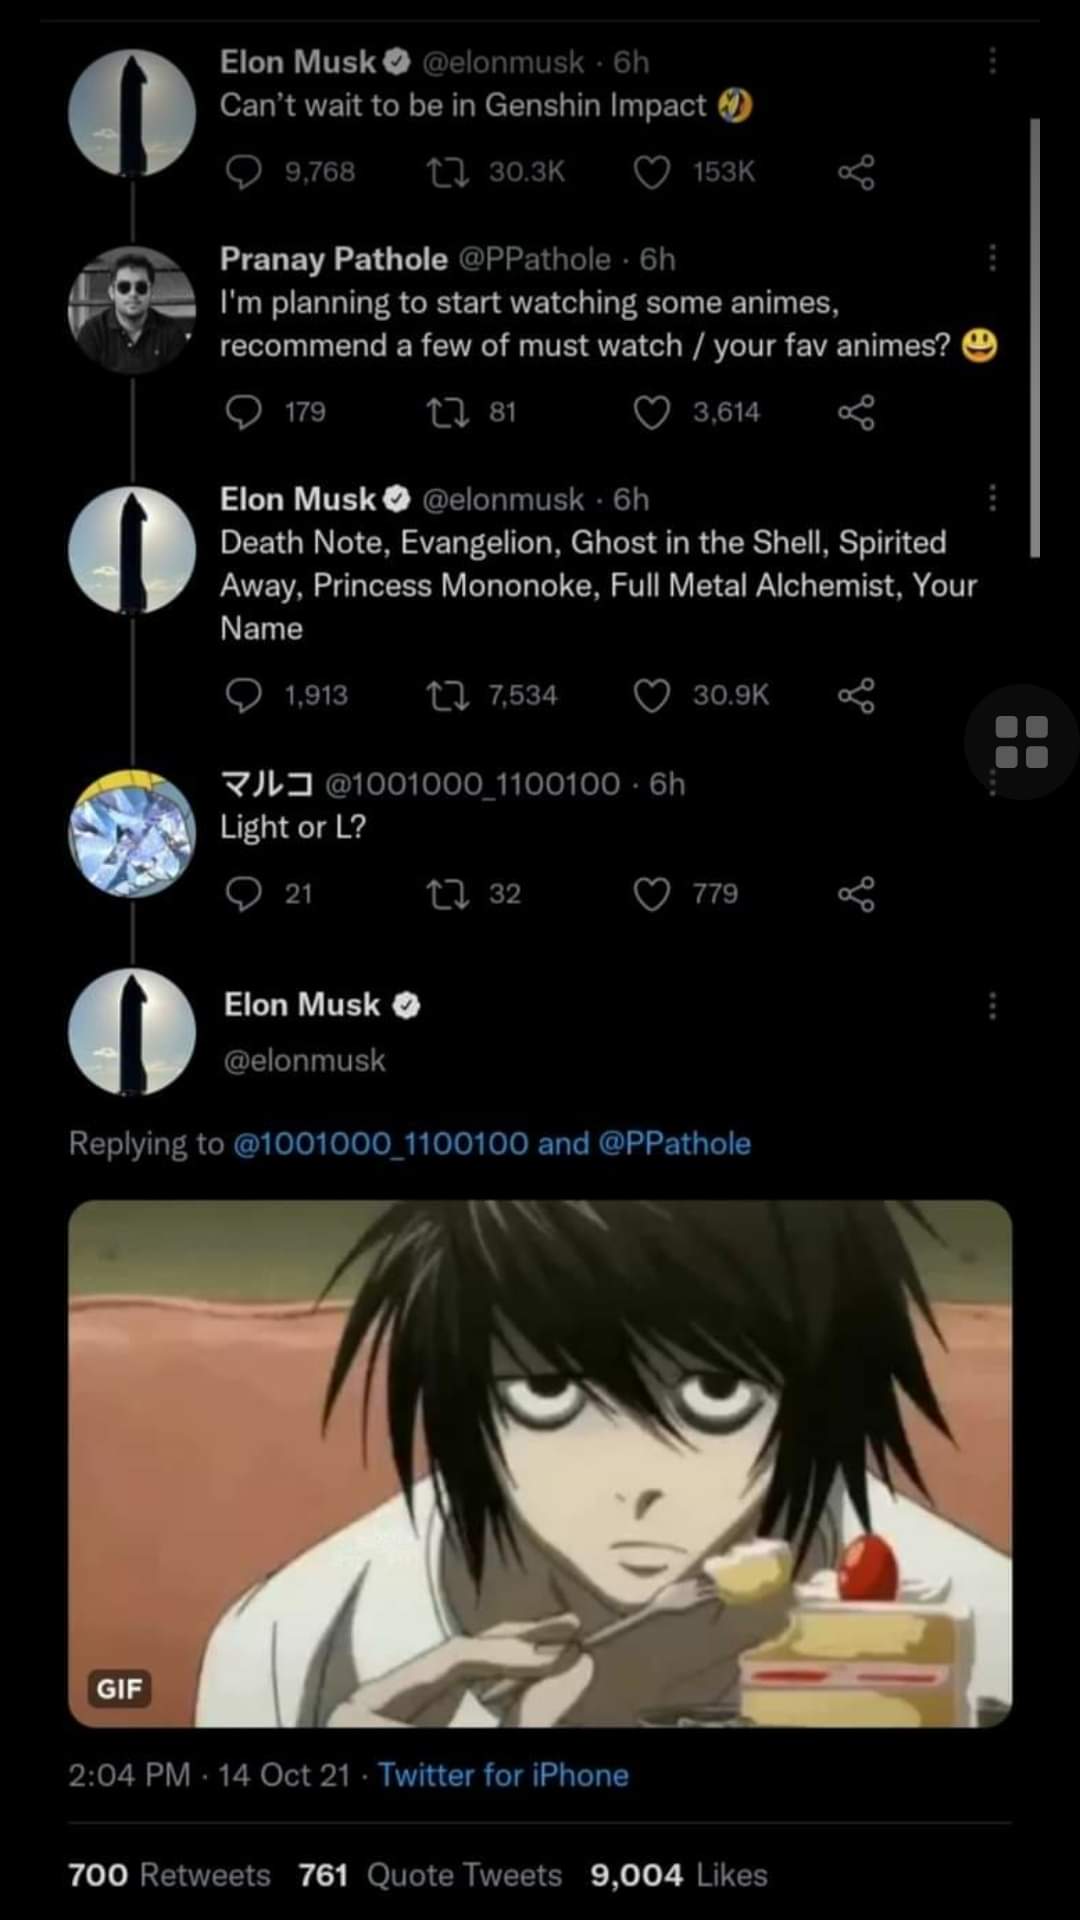 Top 10 Anime Mentioned By Elon Musk on Twitter - Animesoulking